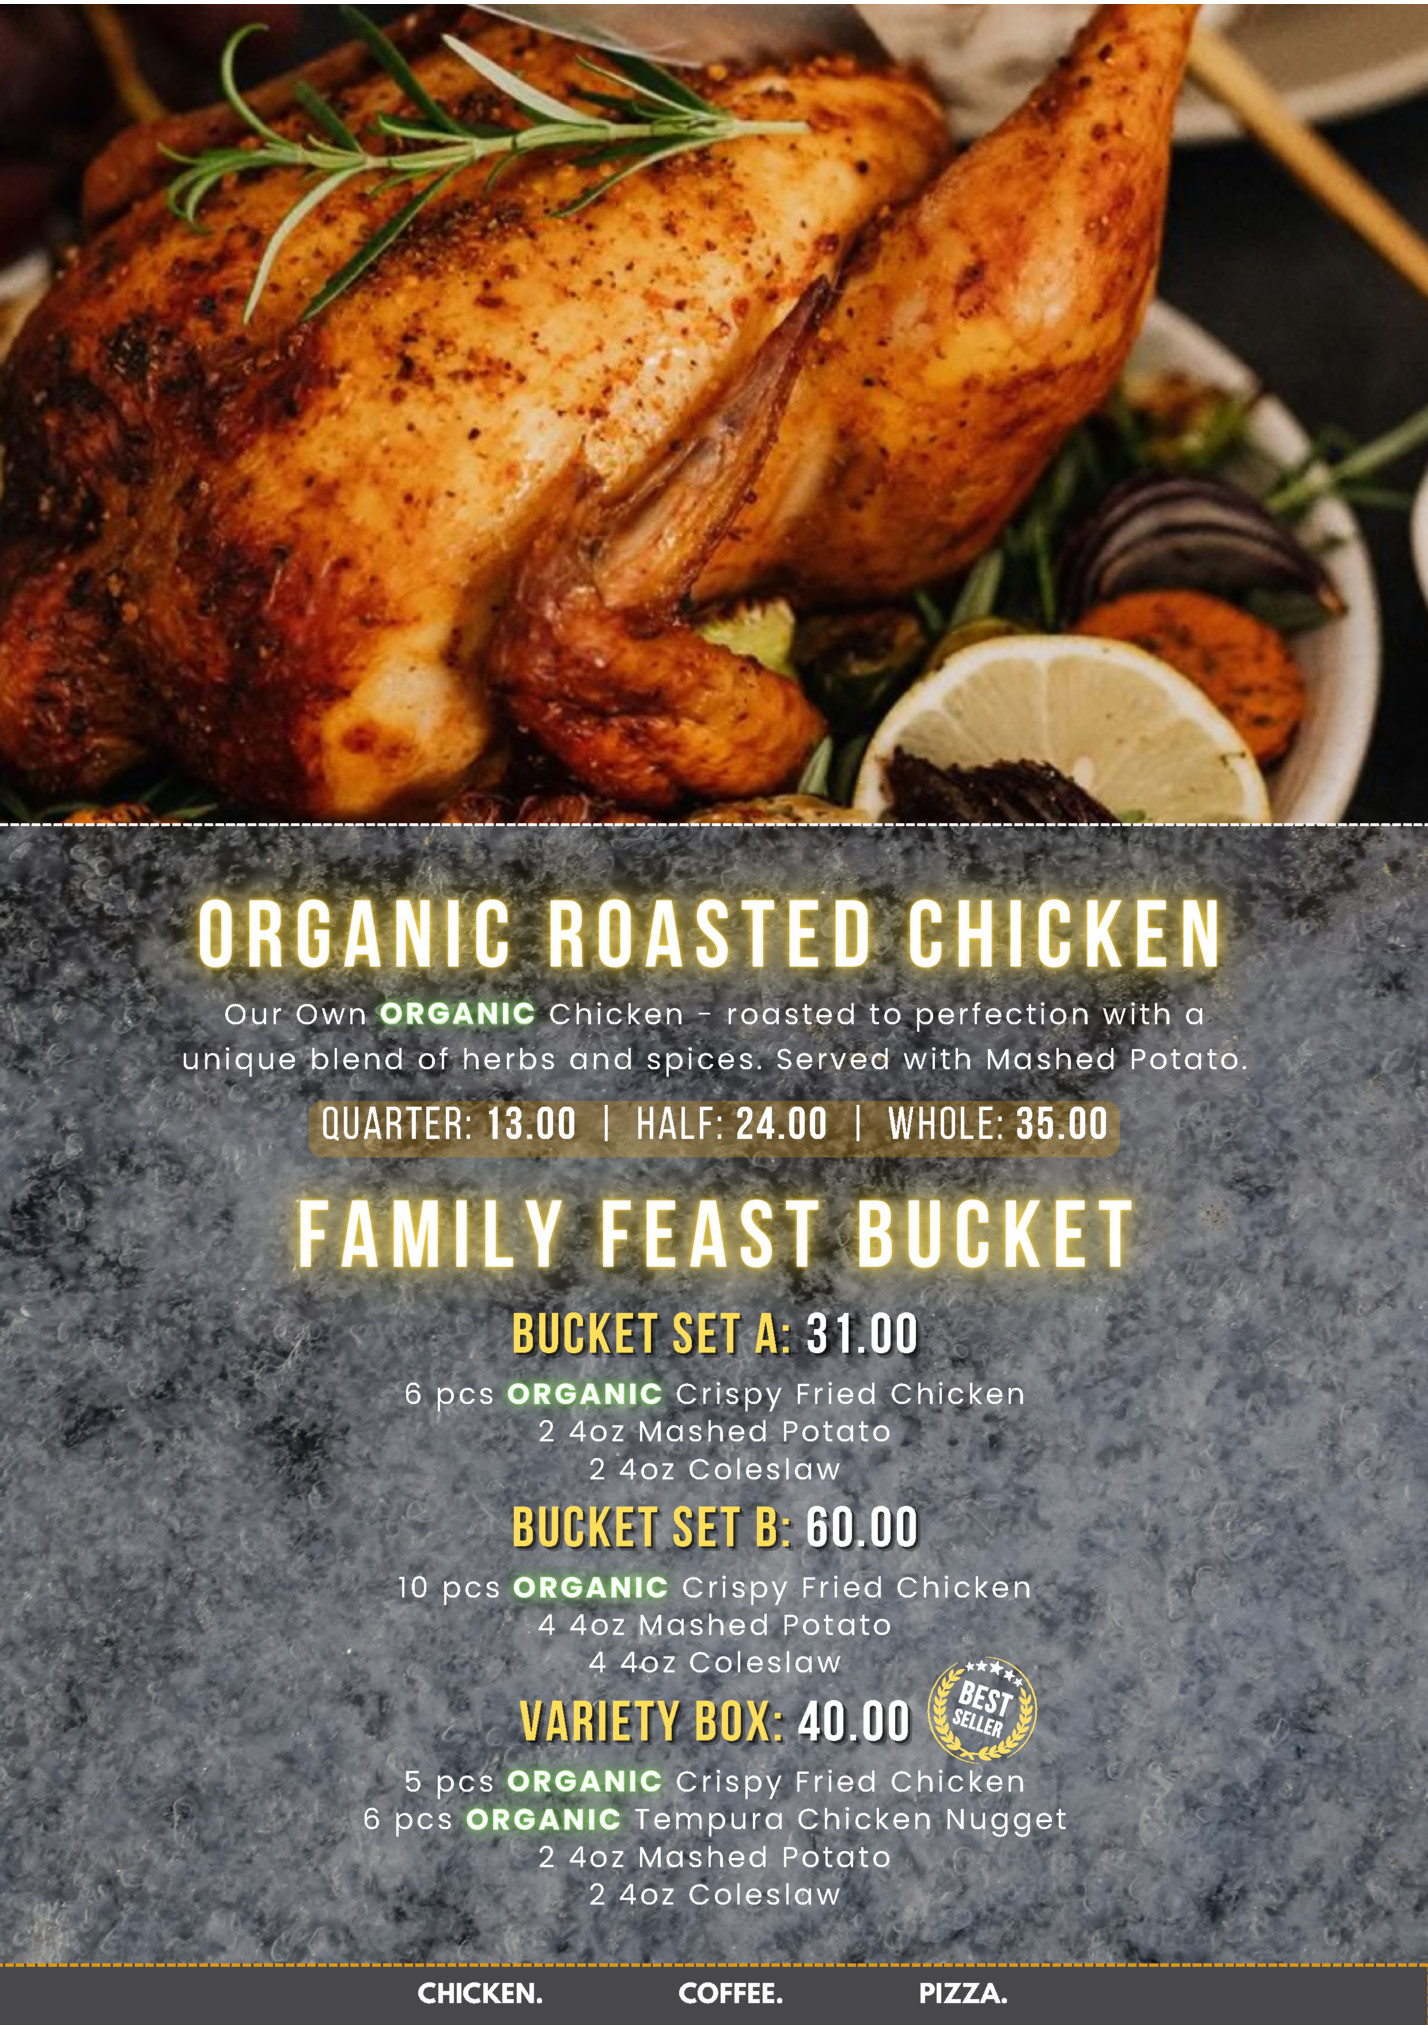 Our Own ORGANIC Chicken - roasted to perfection with a